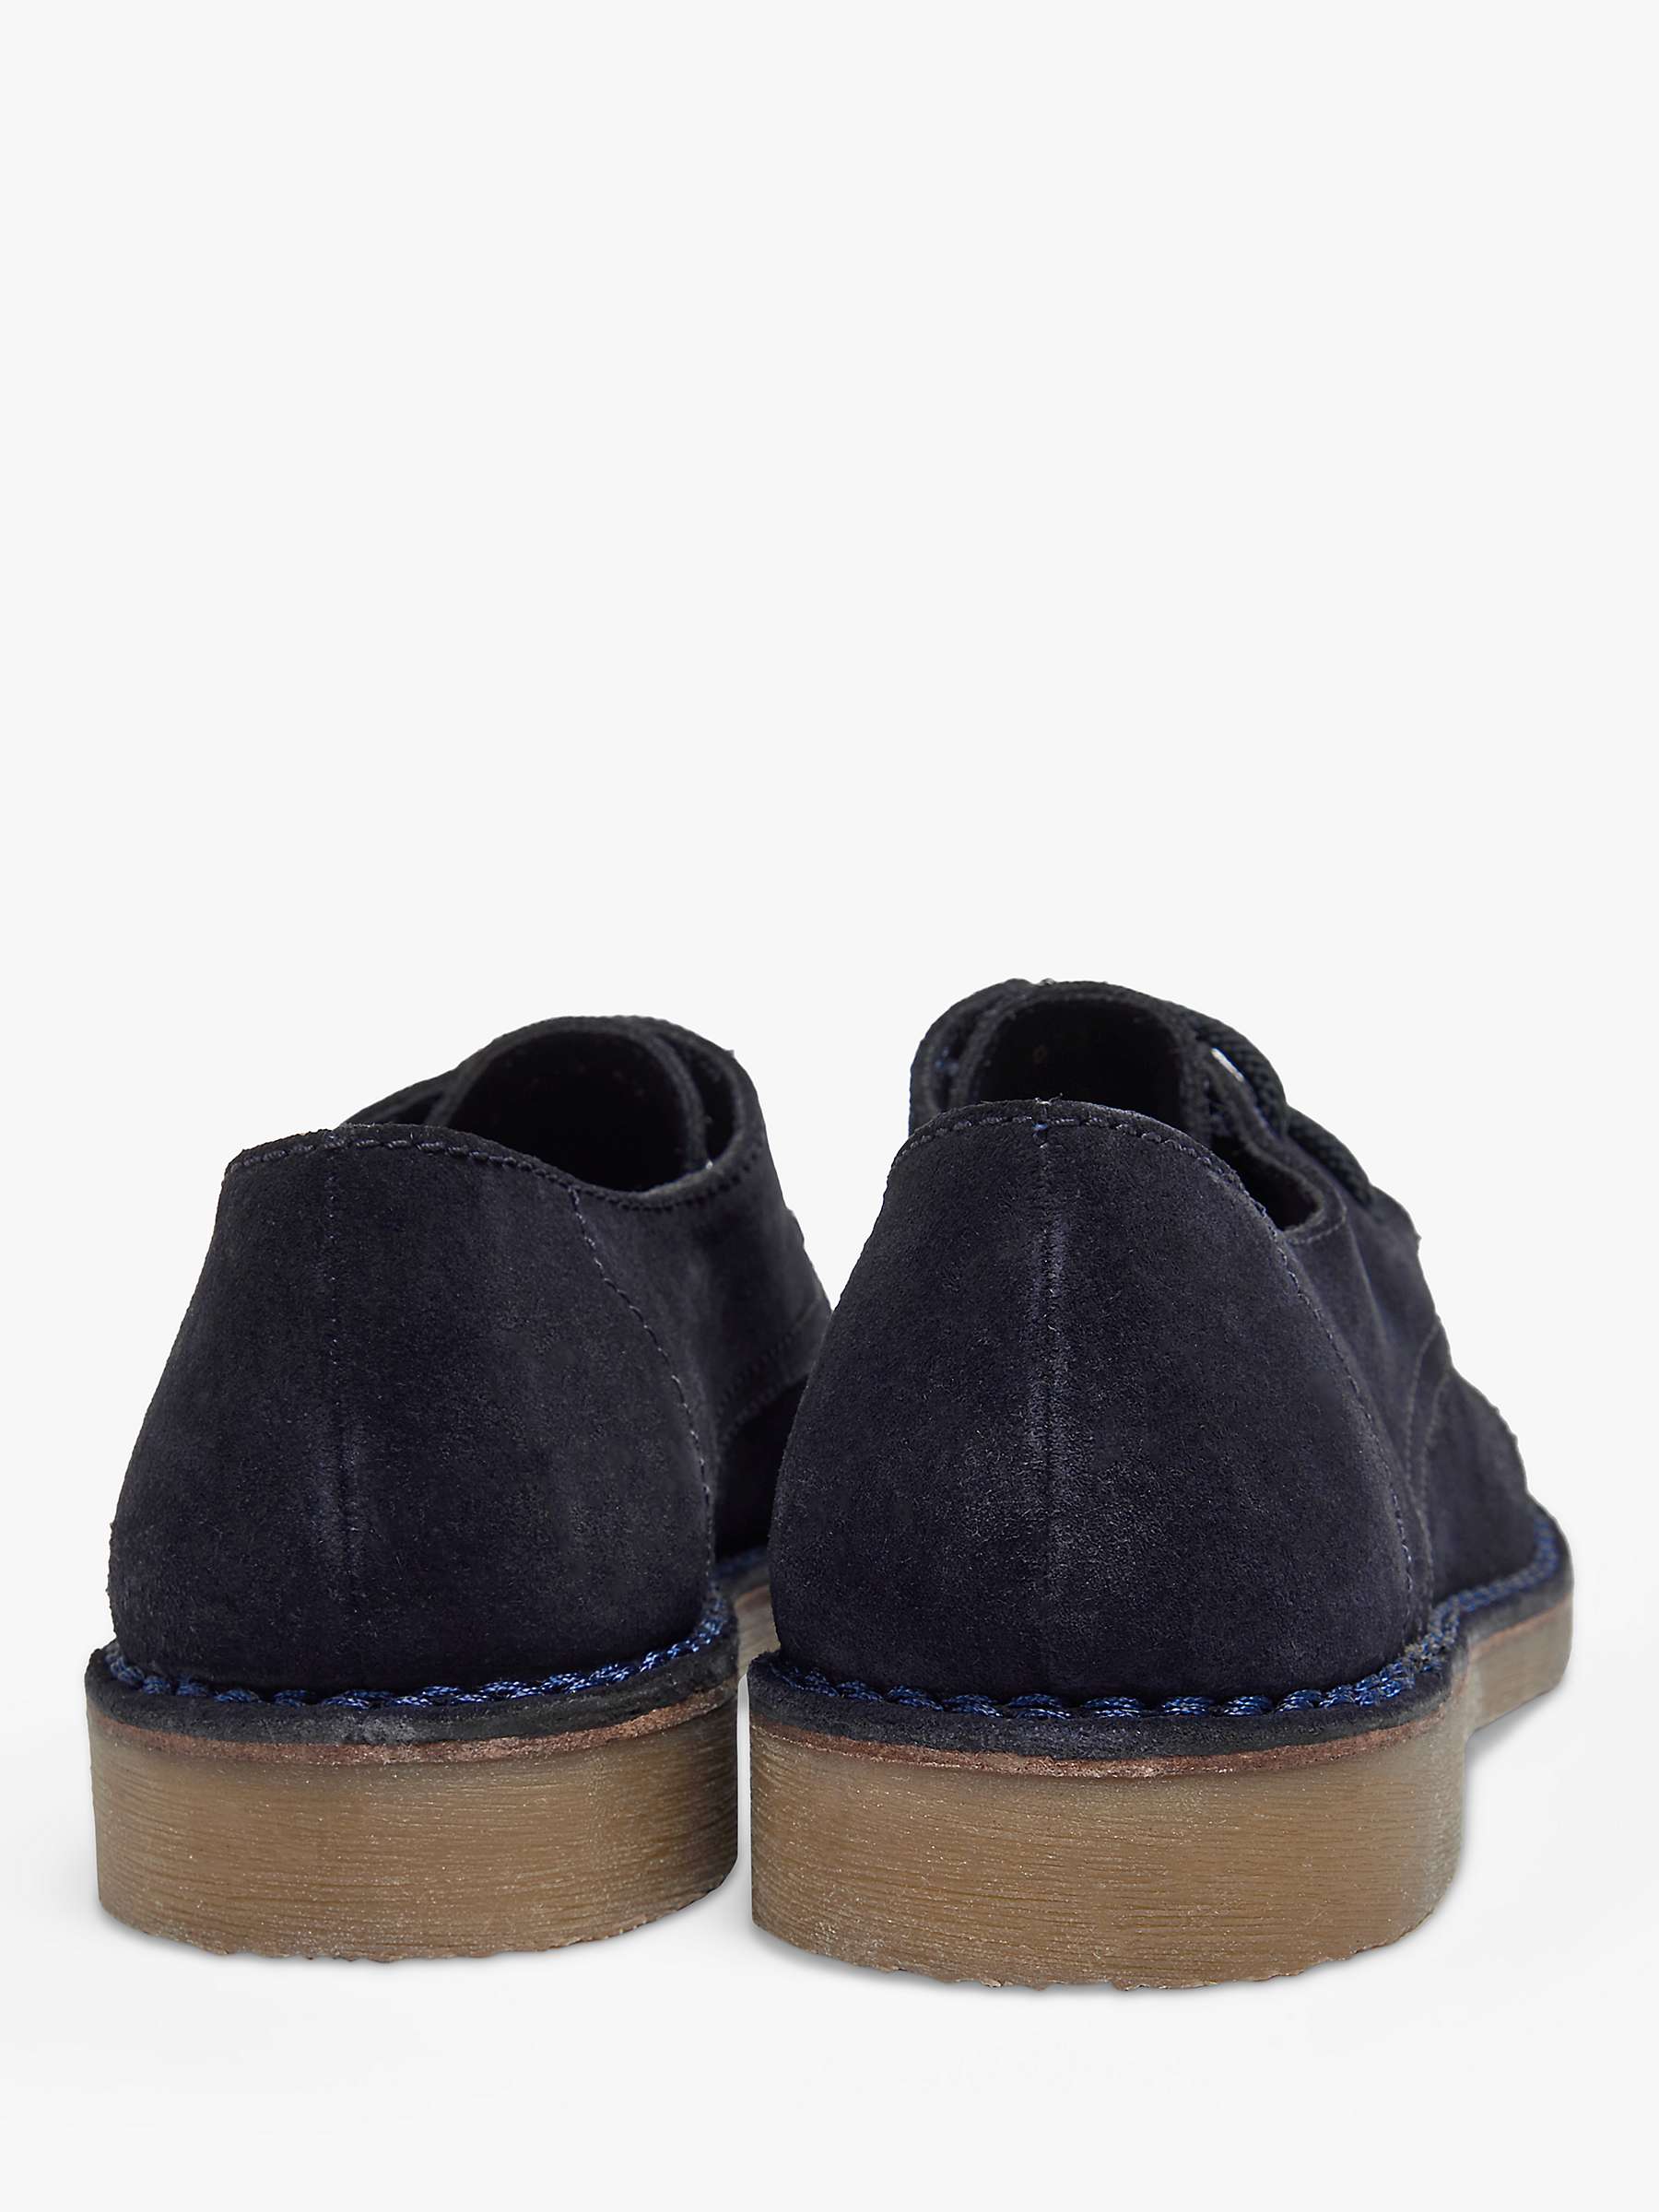 Buy Pod Roderic Suede Shoes, Navy Online at johnlewis.com